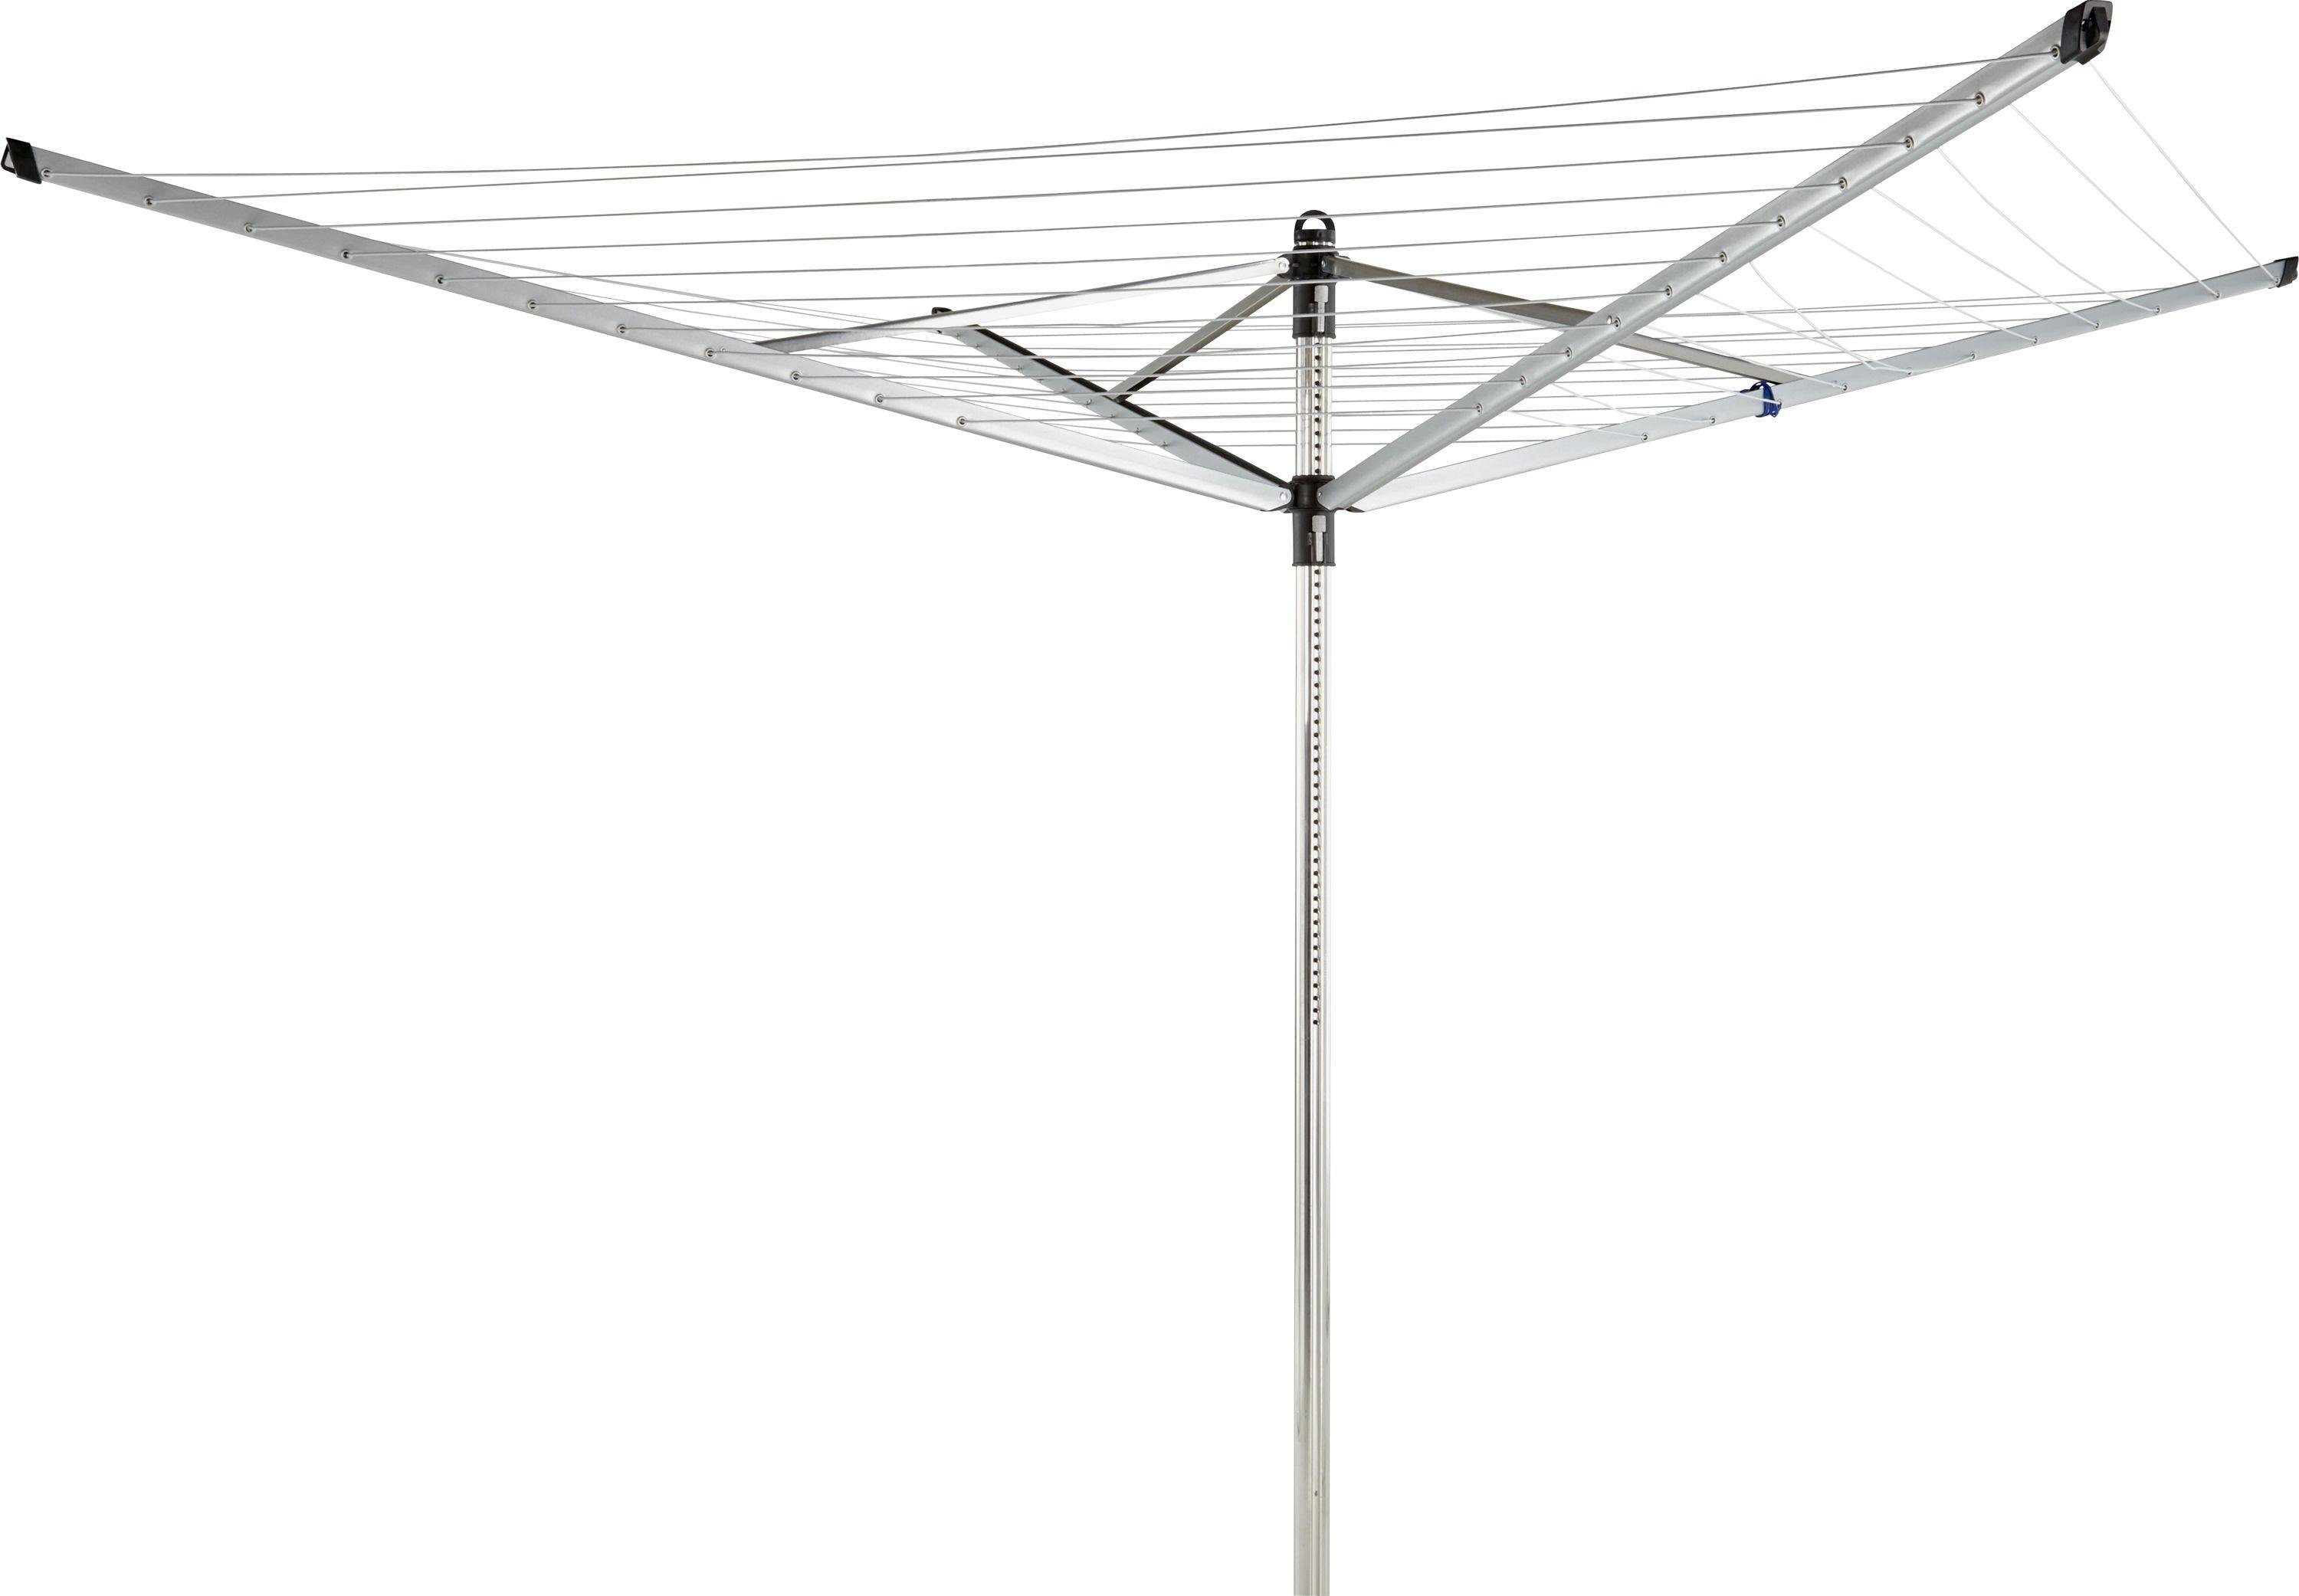 Brabantia 60m Lift-O-Matic Outdoor Washing Line with Cover Reviews